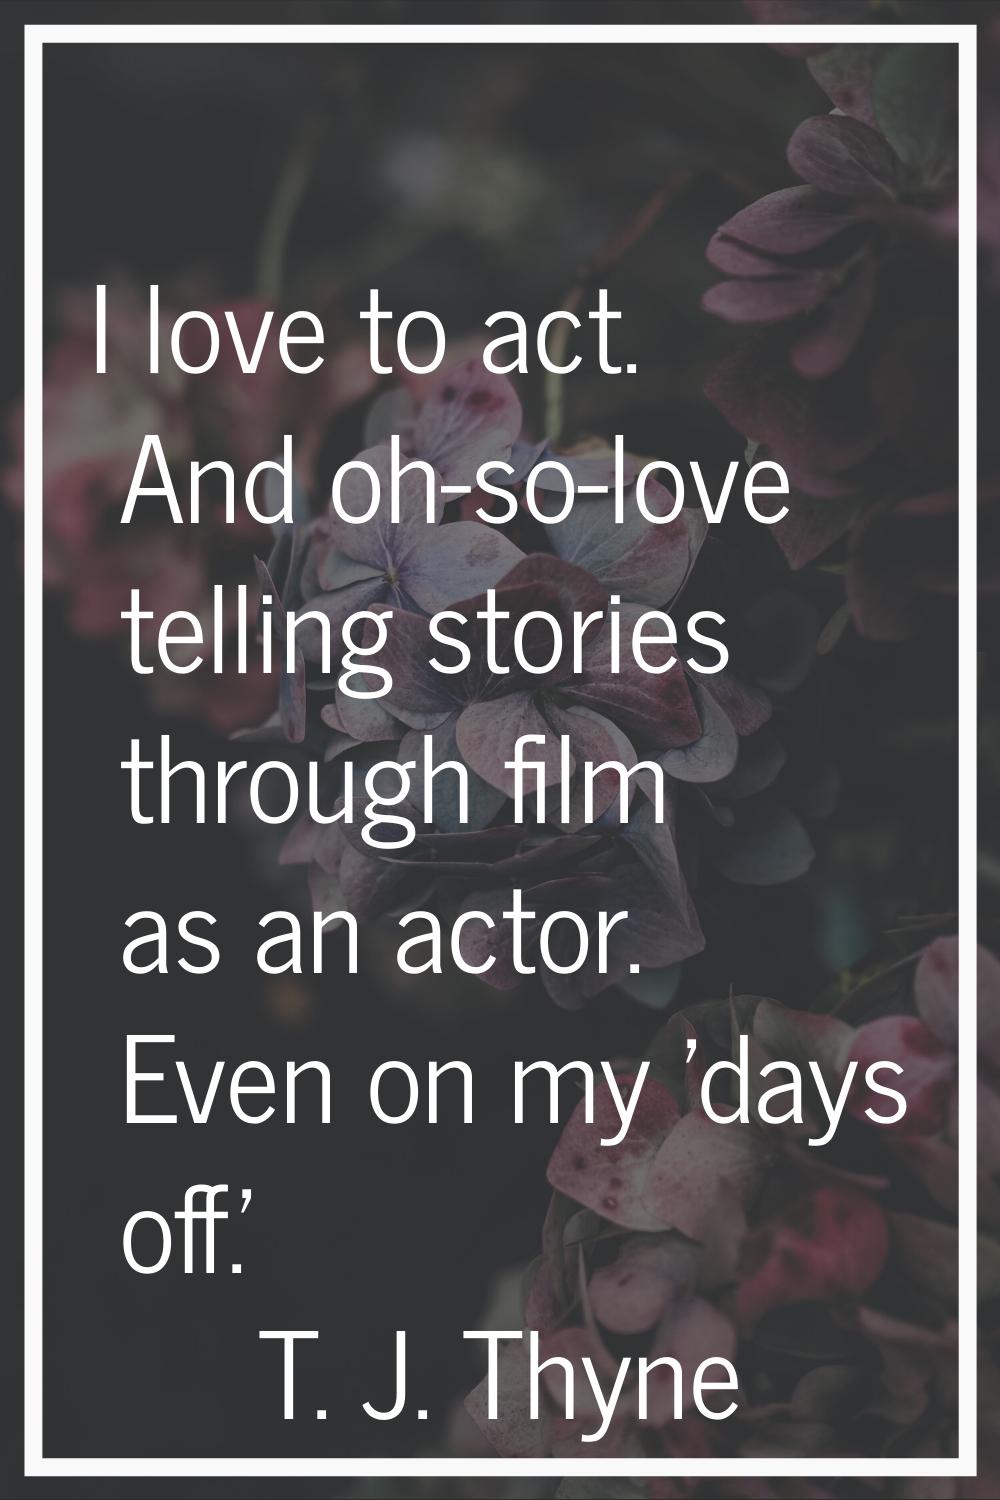 I love to act. And oh-so-love telling stories through film as an actor. Even on my 'days off.'